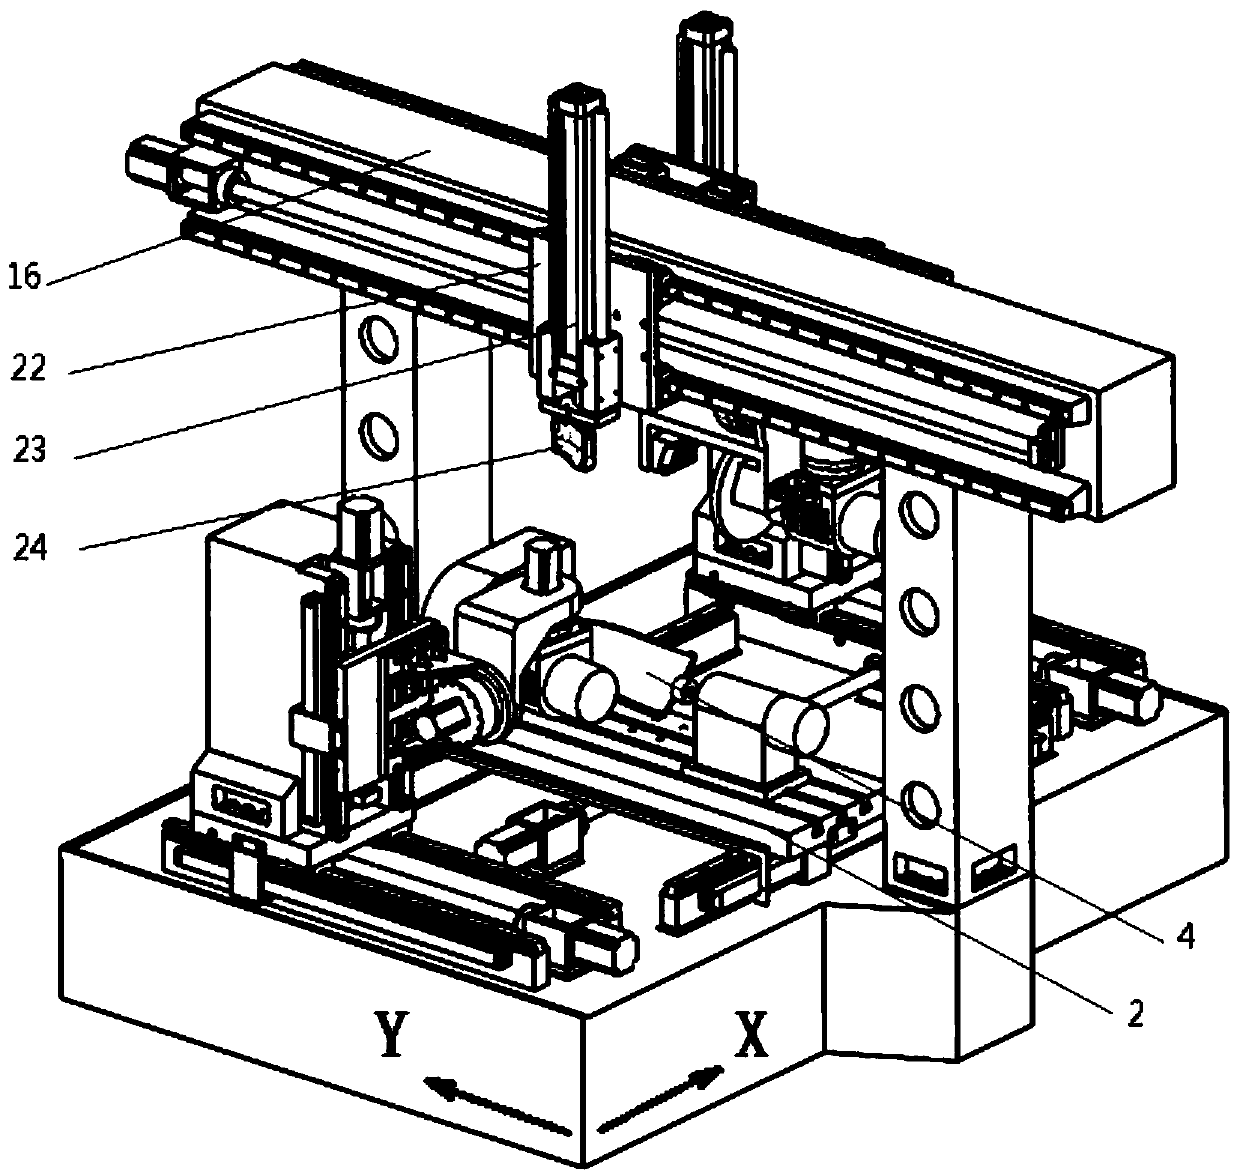 Blade processing machine tool integrating processing and detecting functions